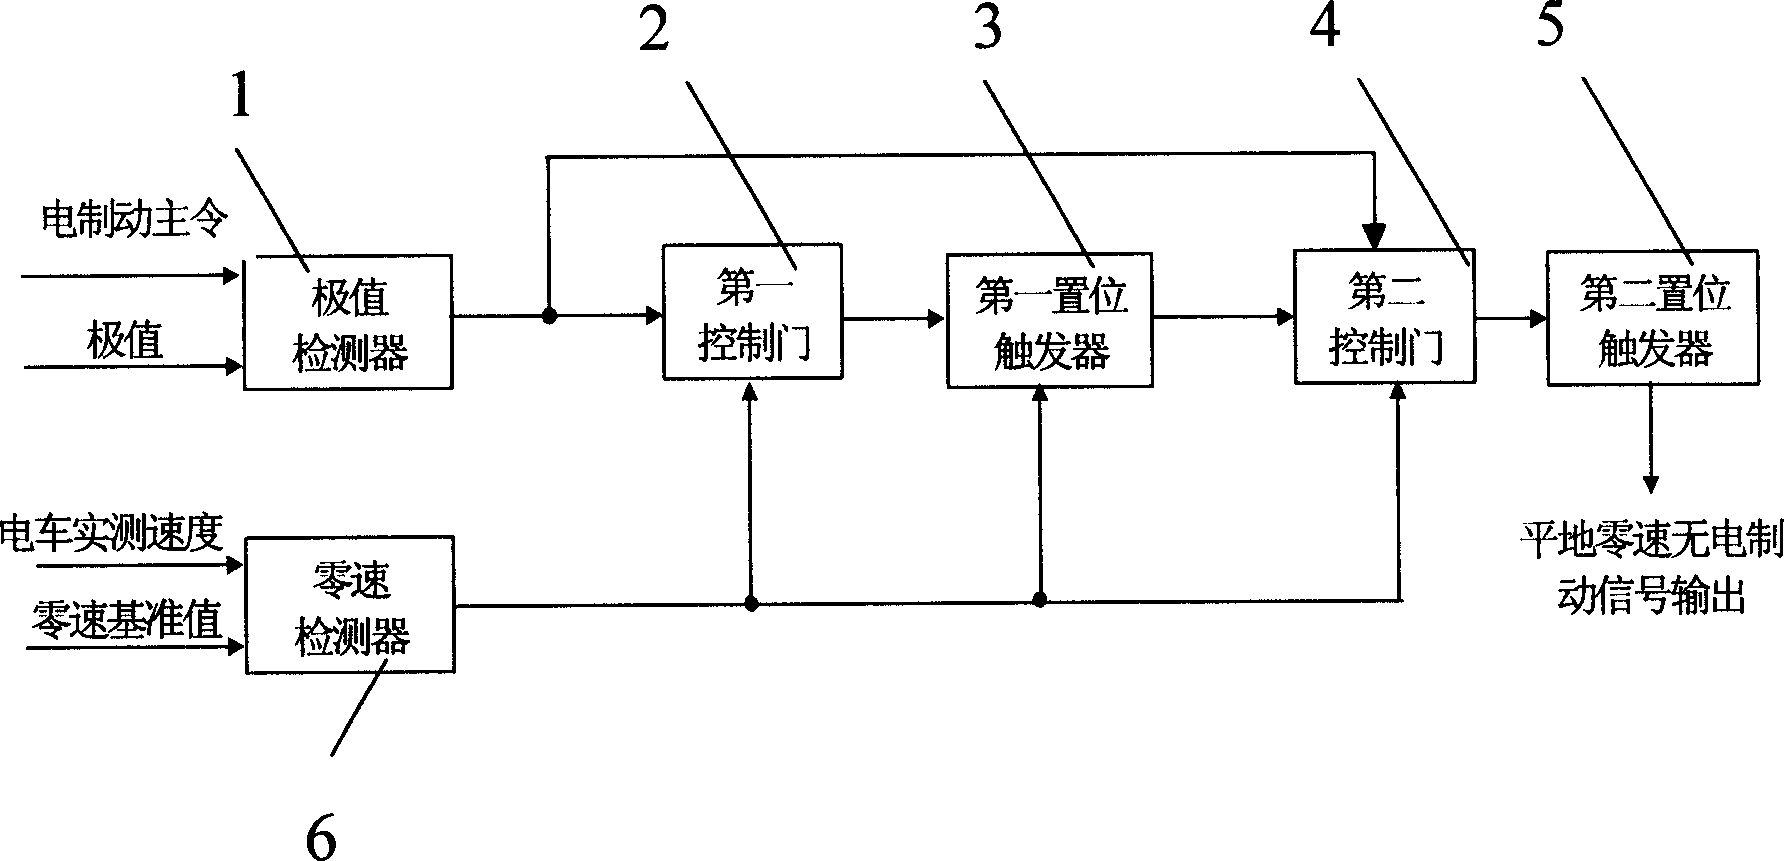 Control device for inhibiting flat nullspeed electric brake used in regenerated feedback type electrical braking electric car